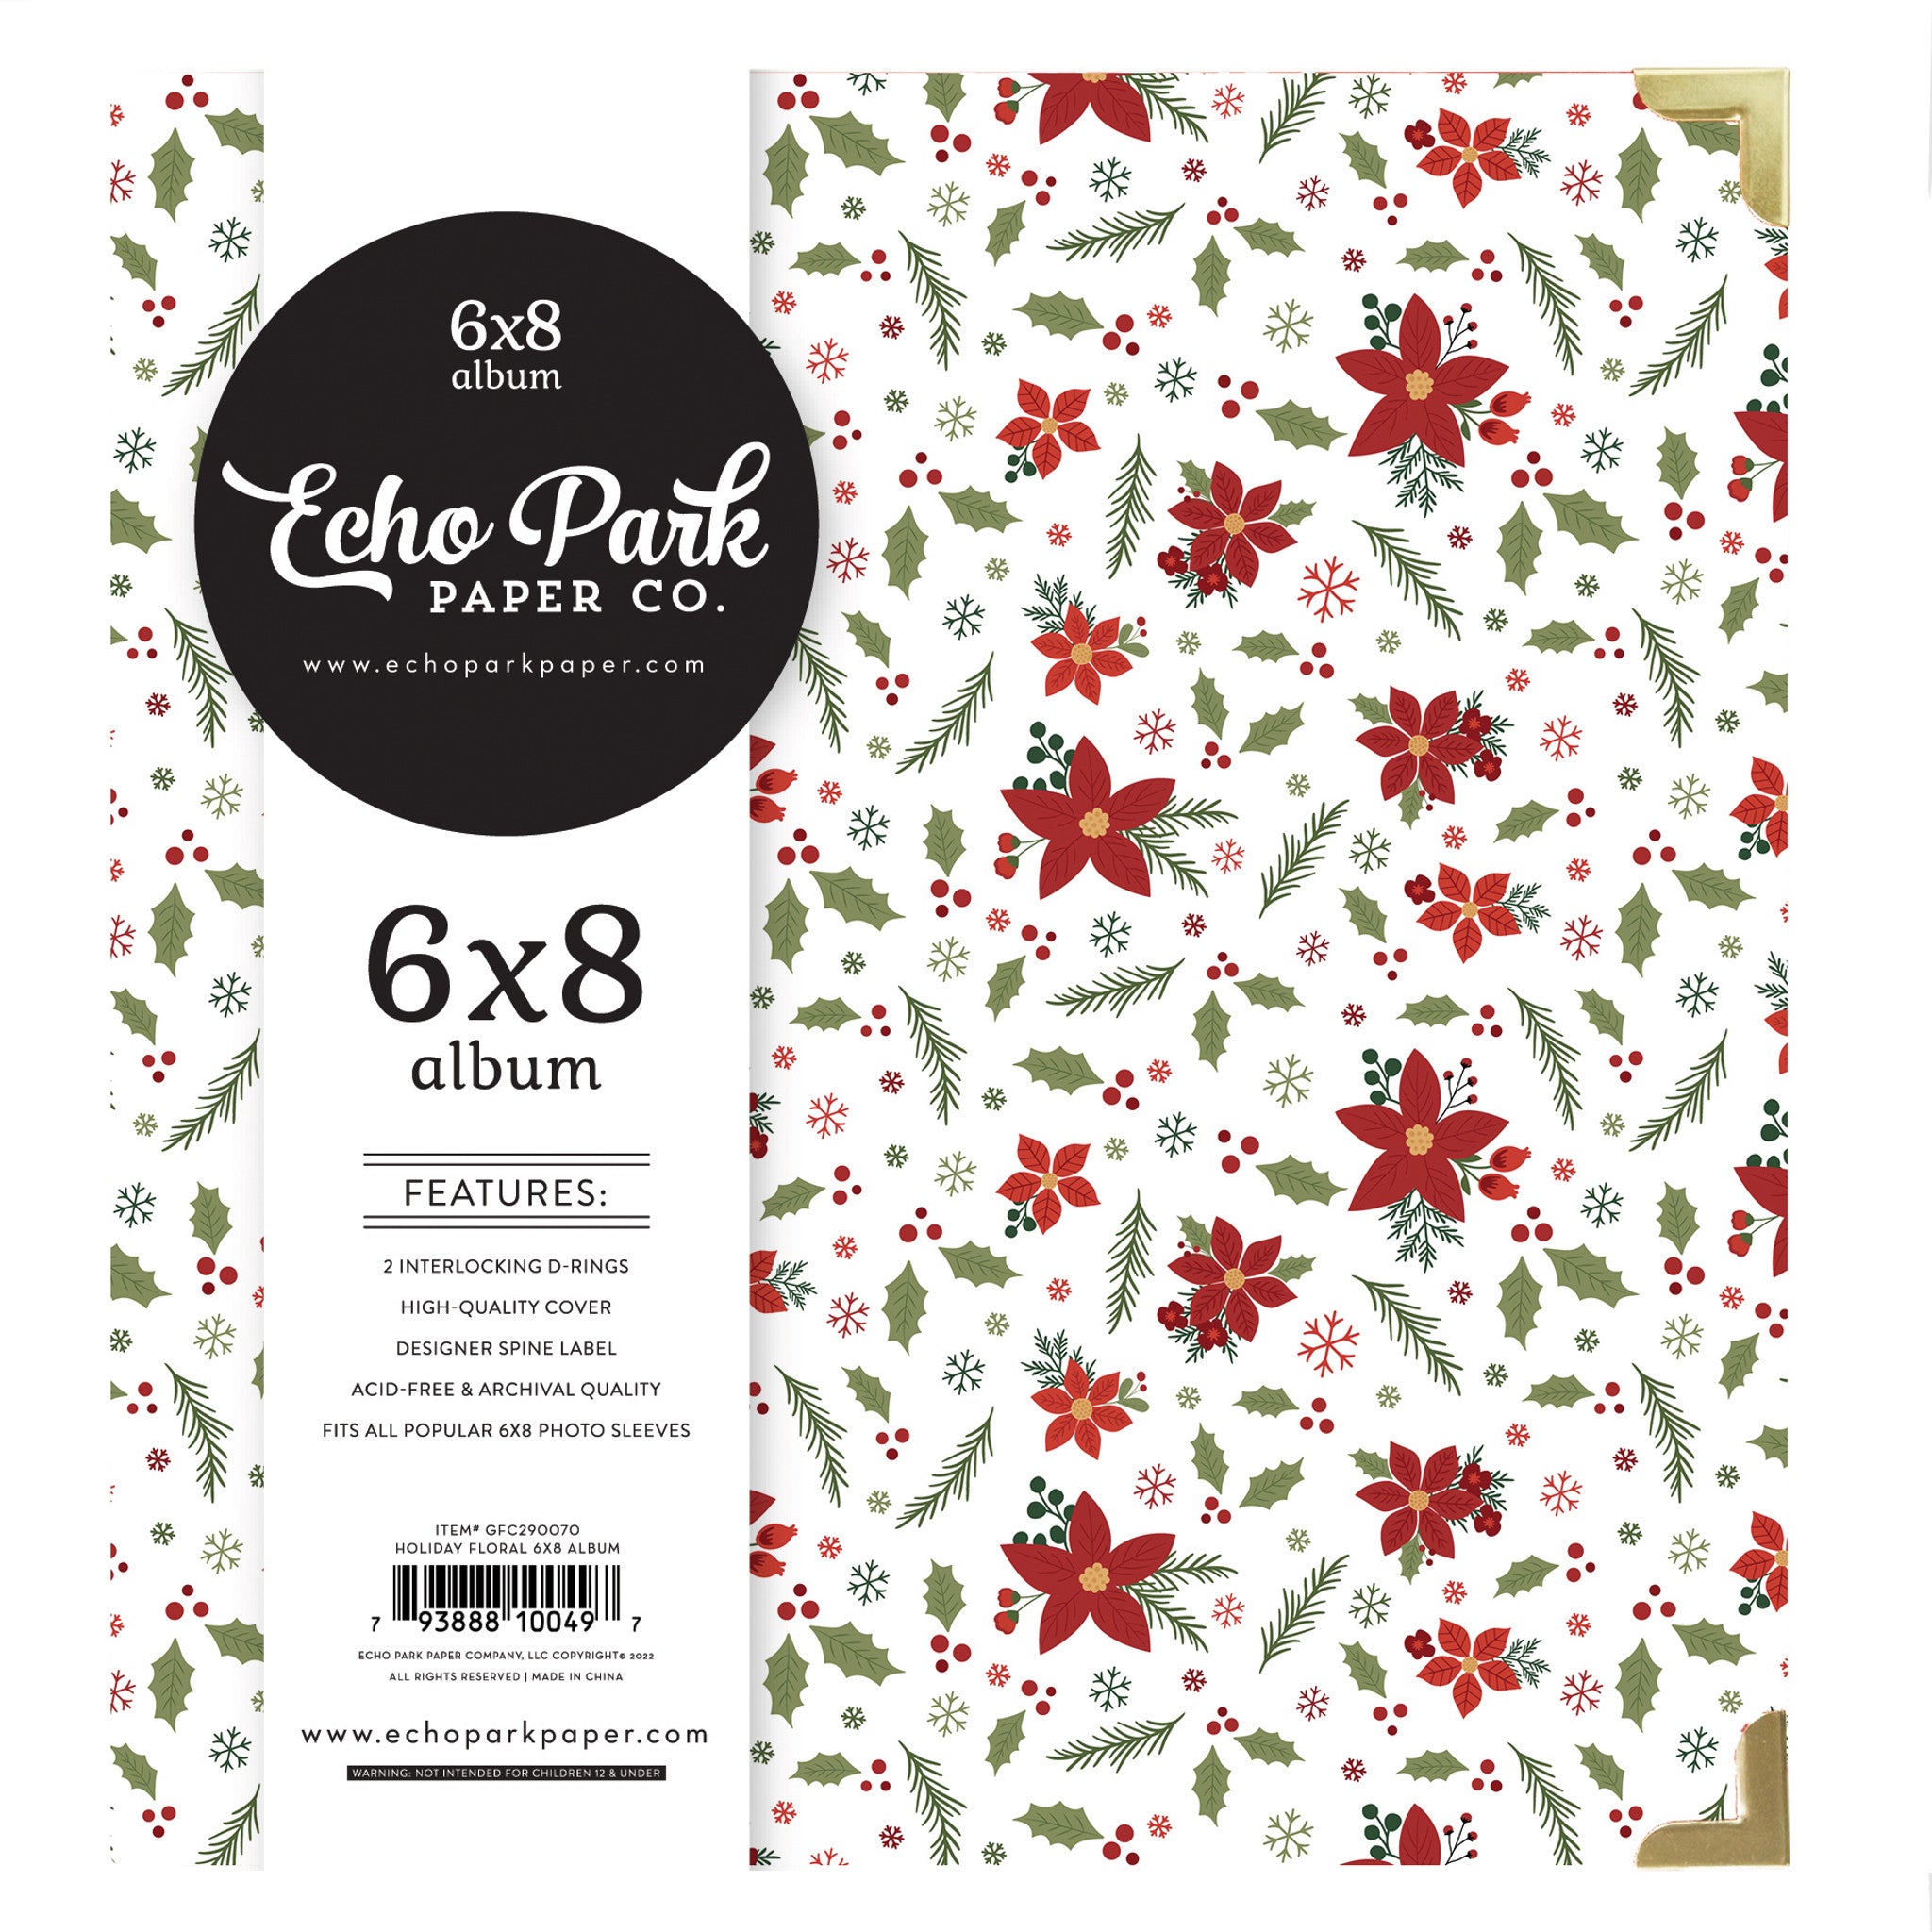 Gnome For Christmas Collection Holiday Floral 6 x 8 Album Binder by Echo Park Paper